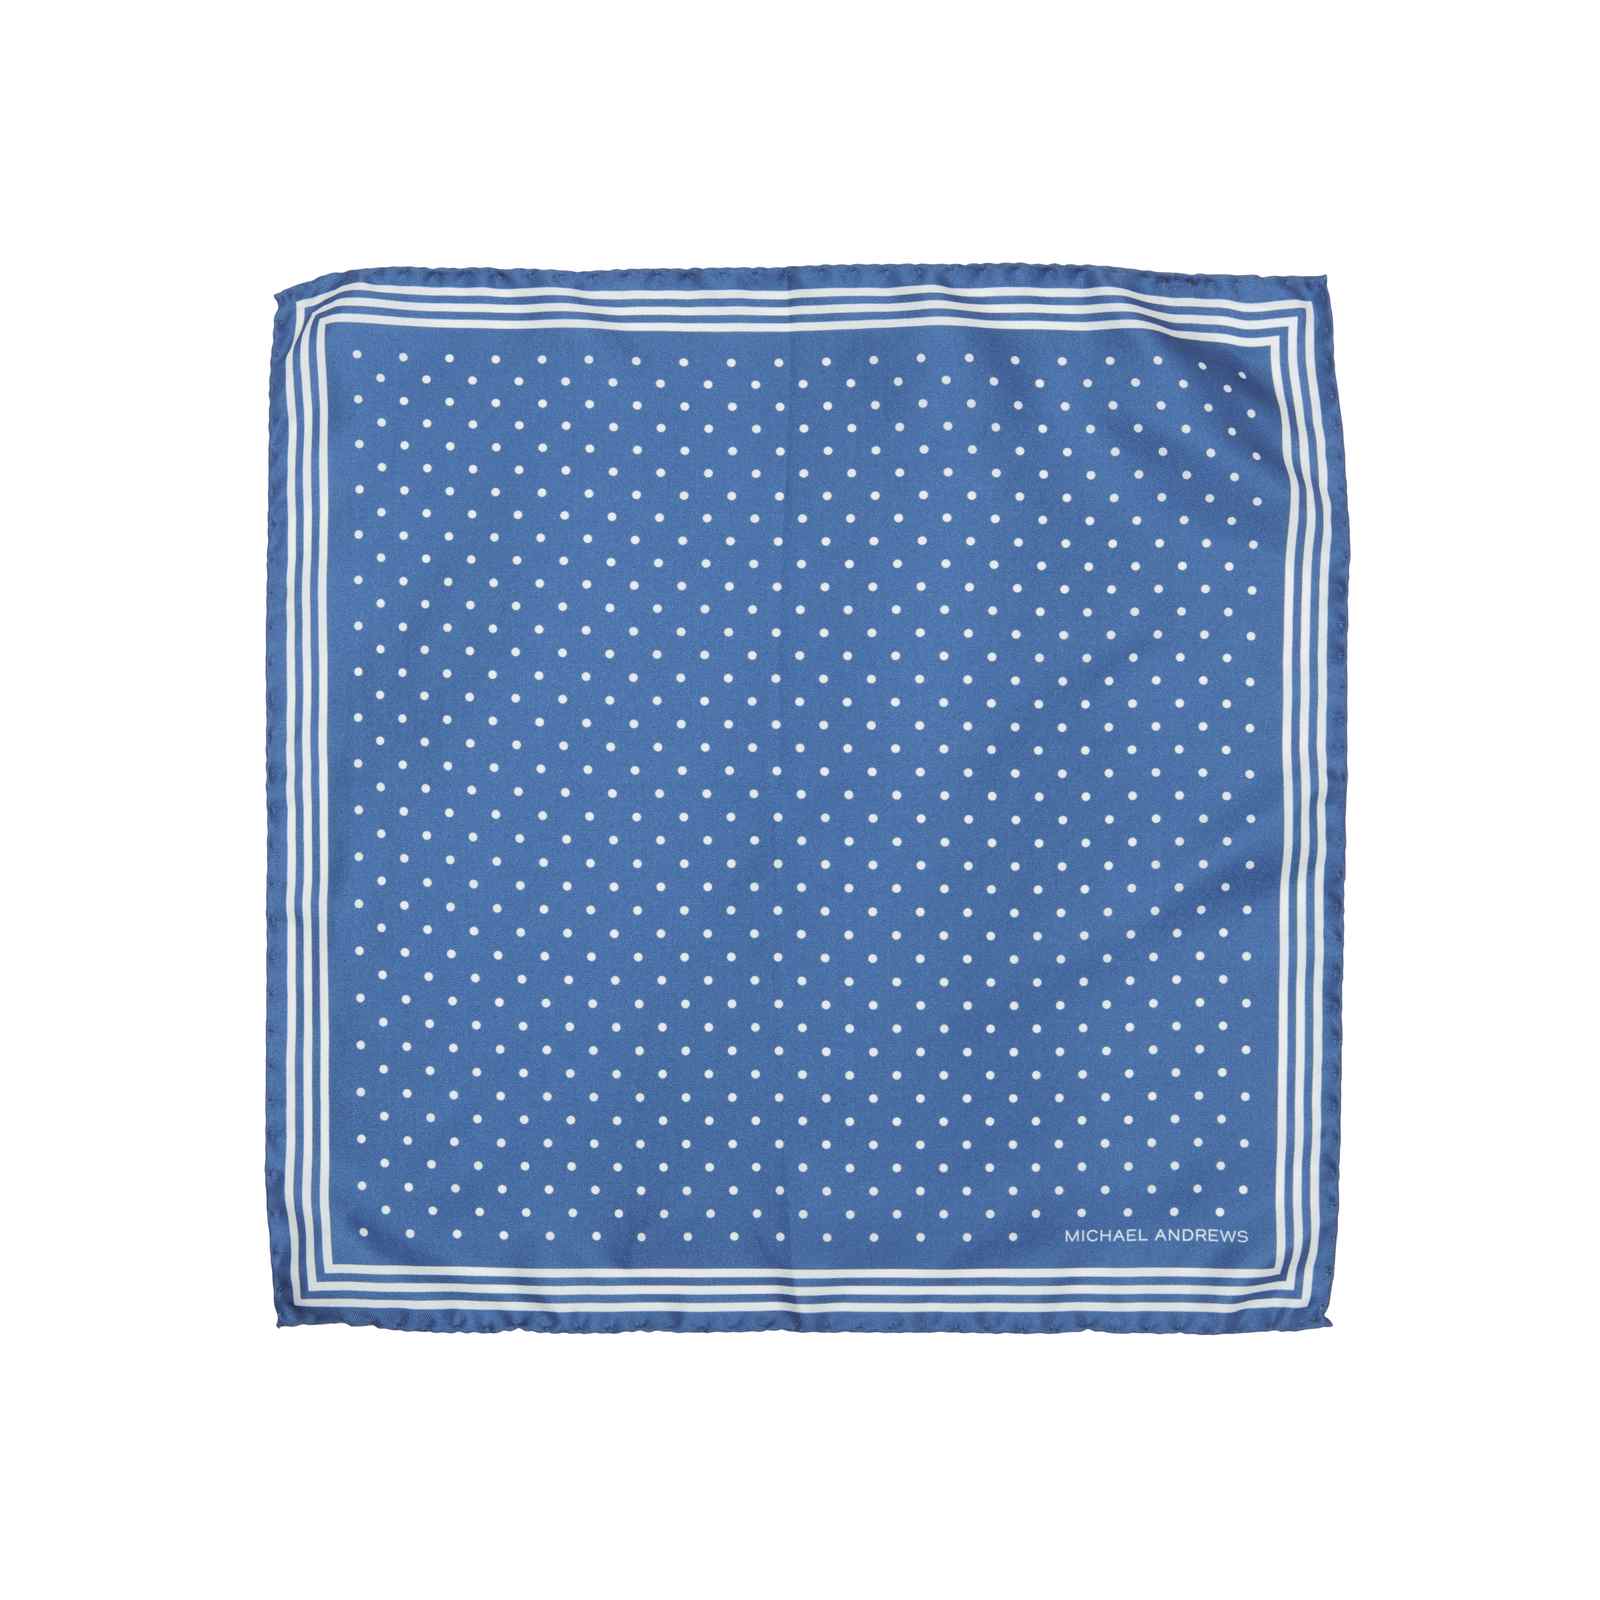 Royal Blue Pocket Square with Classic White Polka Dots and Striped Border